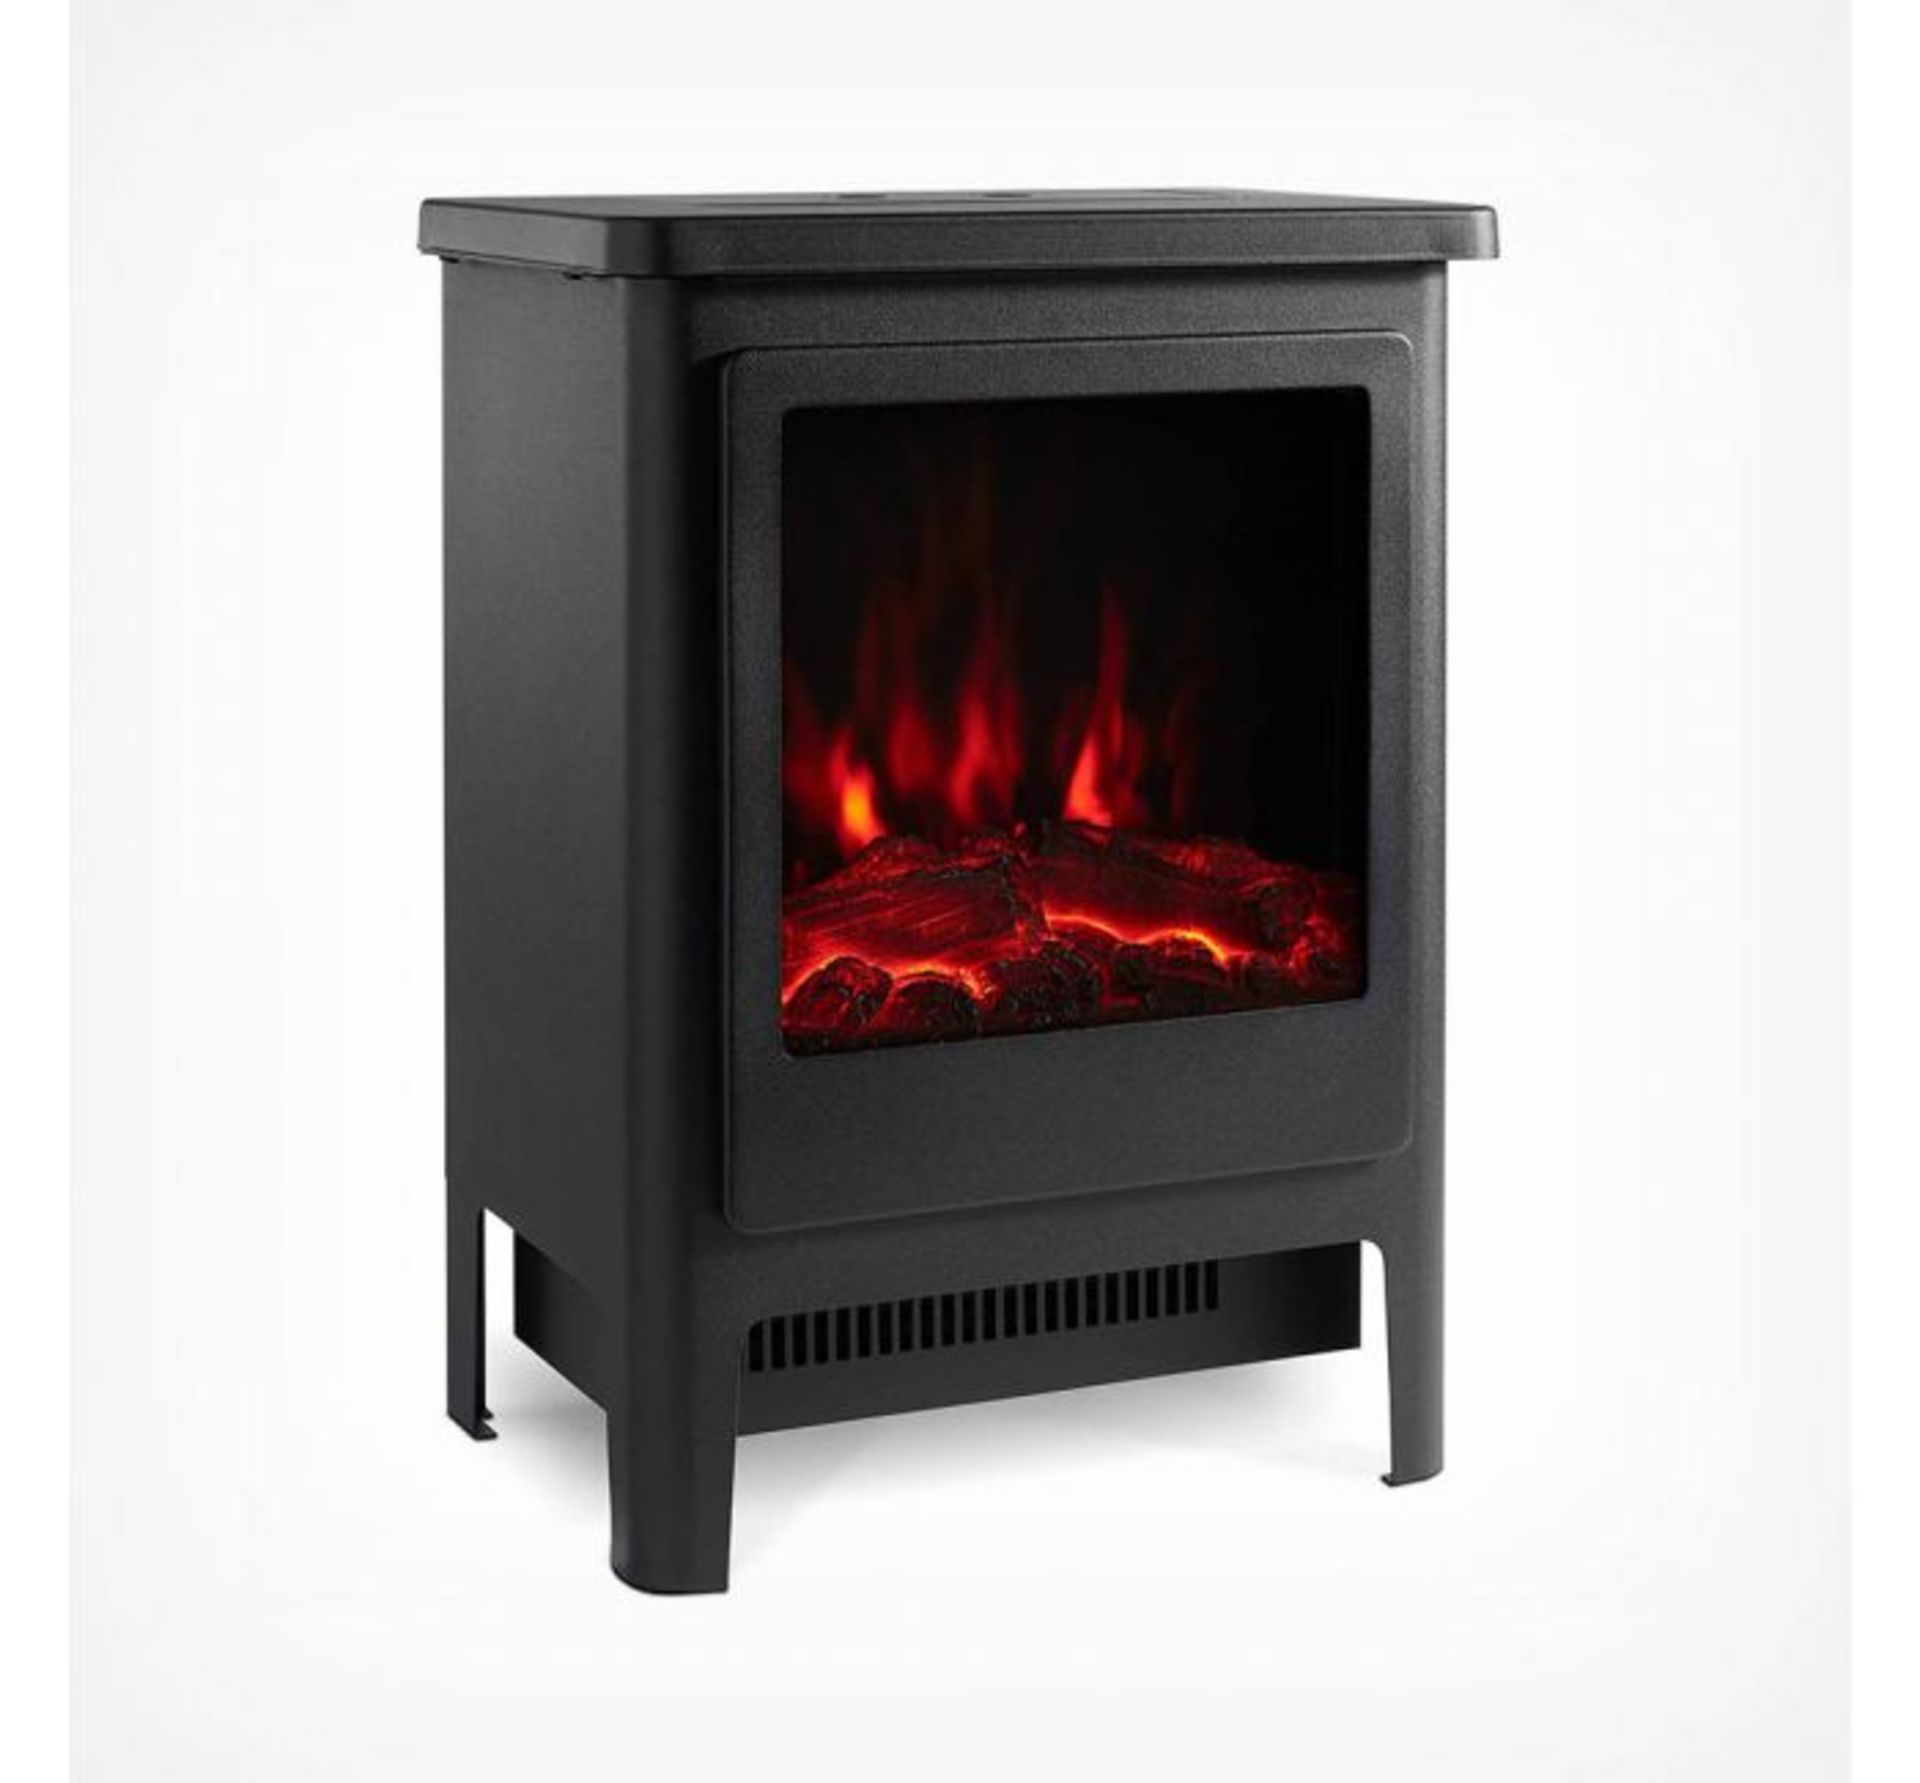 (K13) 1900W Contemporary Stove Heater The large window displays a realistic LED log fire Fea... - Image 2 of 3